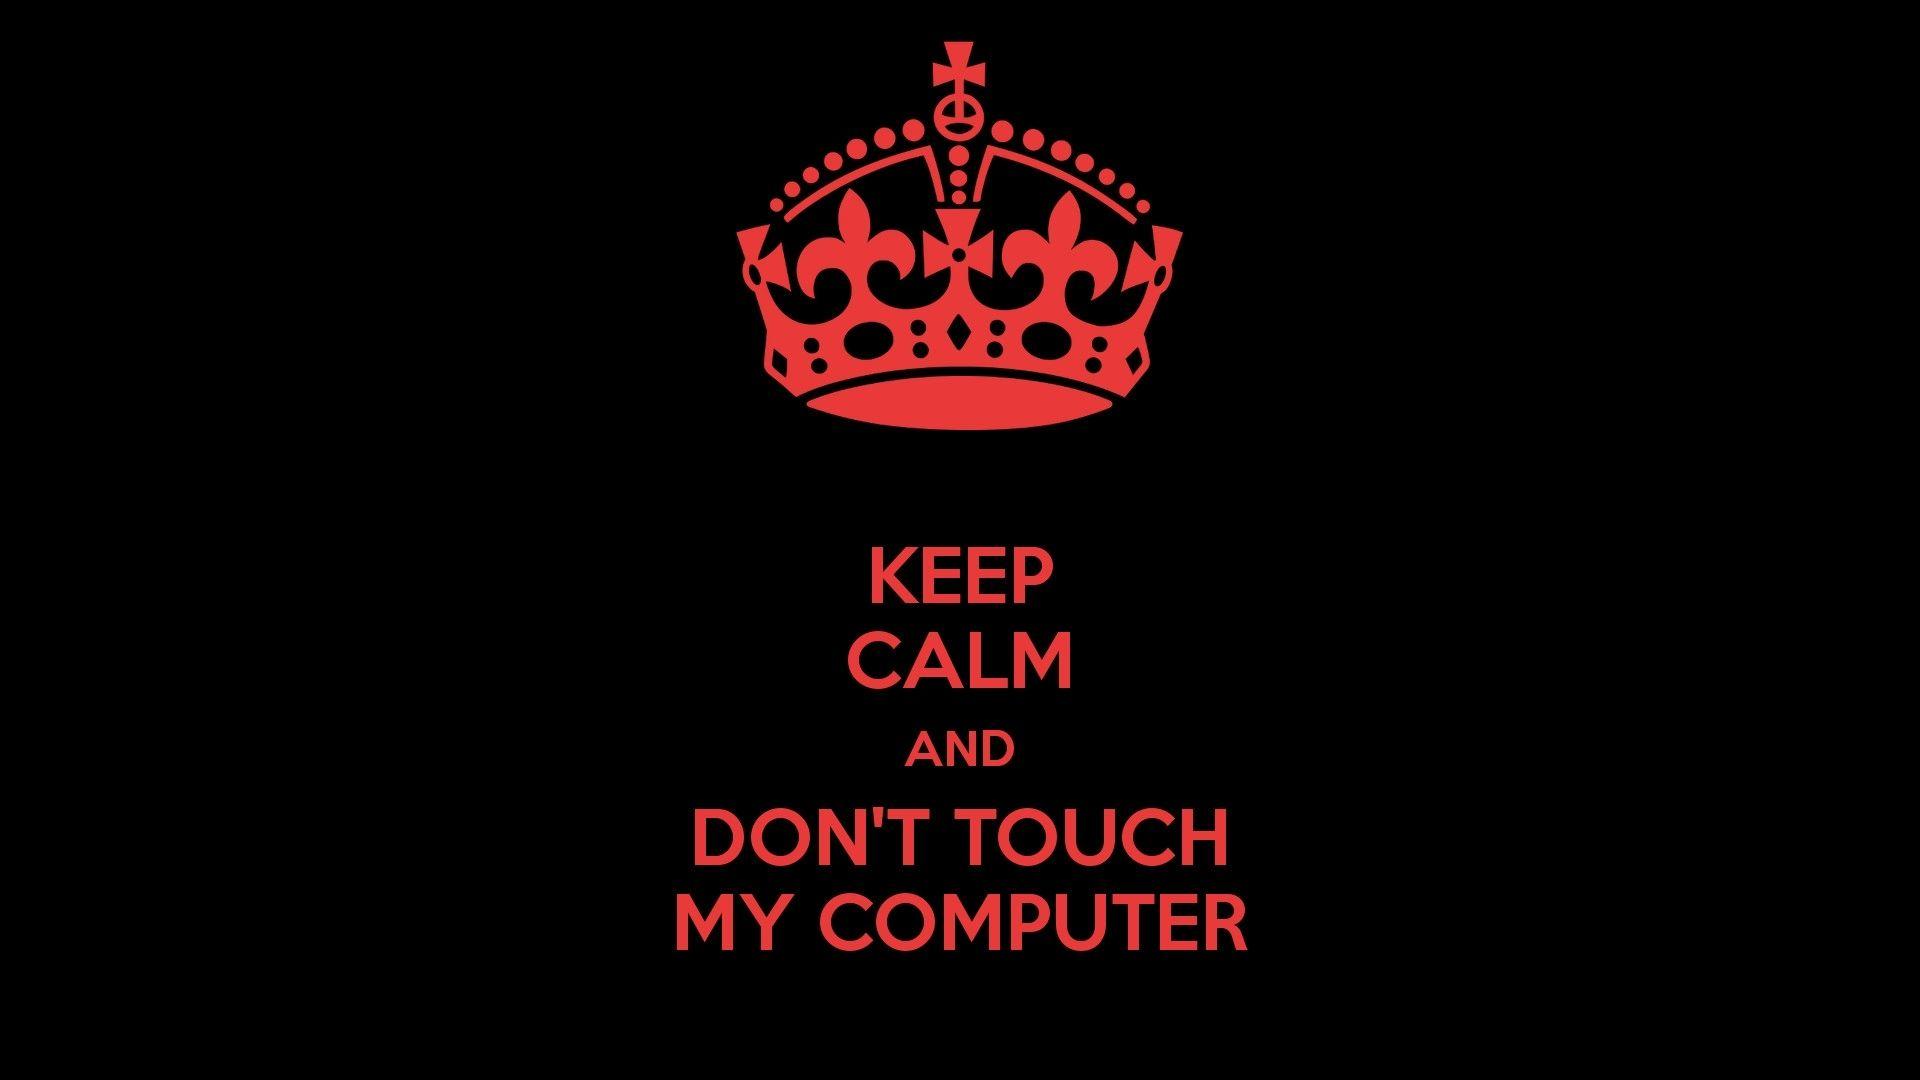 Top Don't Touch My Computer Wallpaper FULL HD 1920×1080 For PC Desktop. Computer wallpaper, Dont touch, Computer wallpaper desktop wallpaper